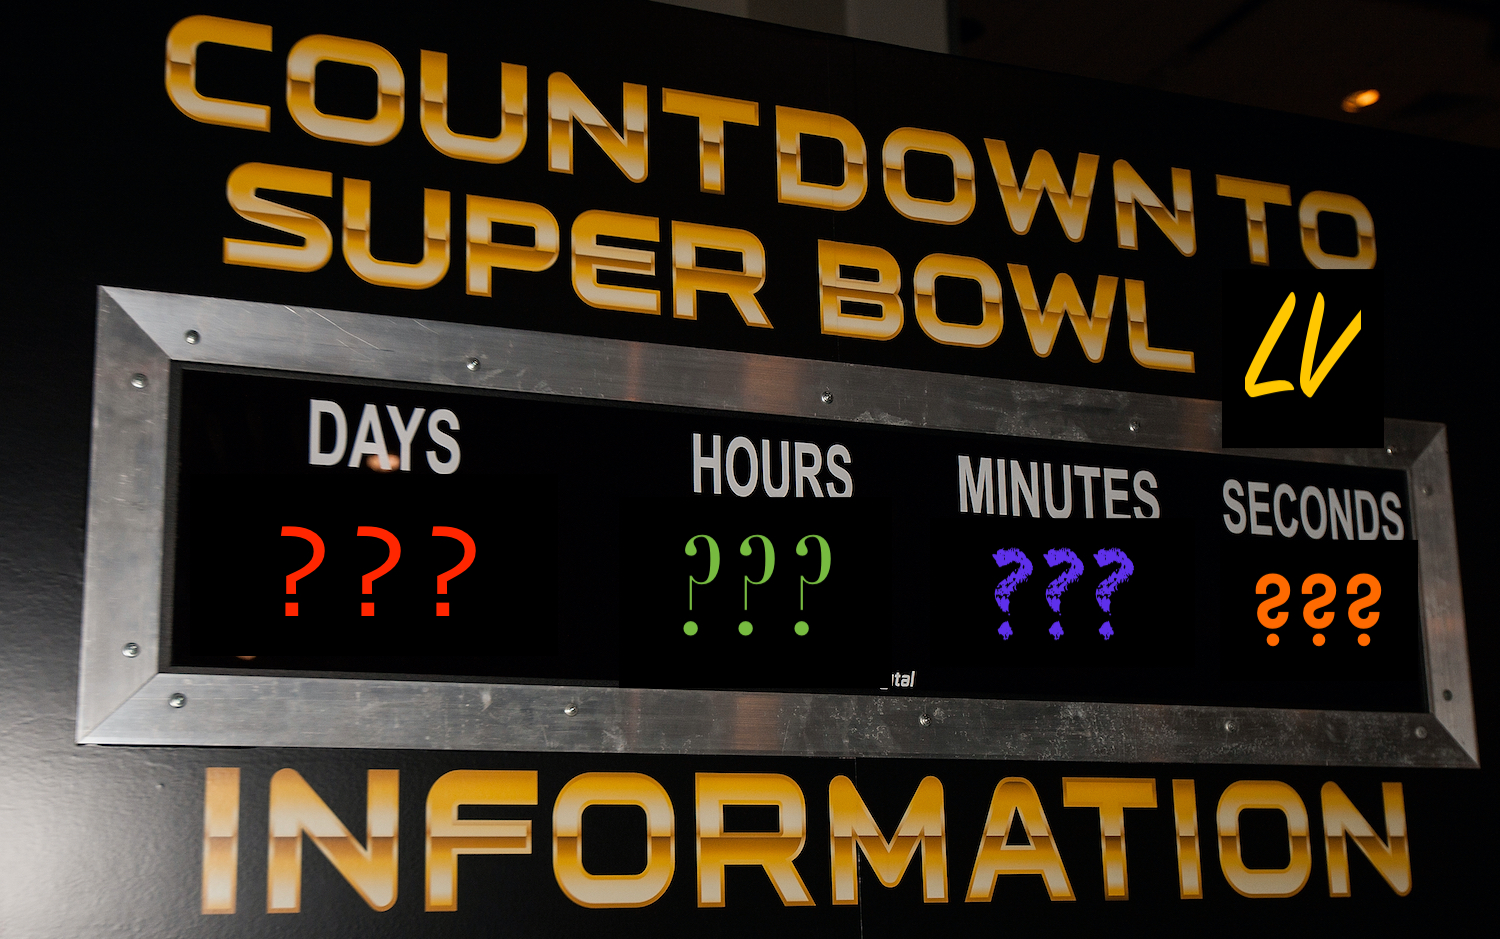 SAN FRANCISCO, CA - FEBRUARY 03: General view of a Super Bowl countdown clock during the NFL Experience exhibition before Super Bowl 50 at the Moscone Center on February 3, 2016 in San Francisco, California. (Photo by Jason O. Watson/Getty Images)